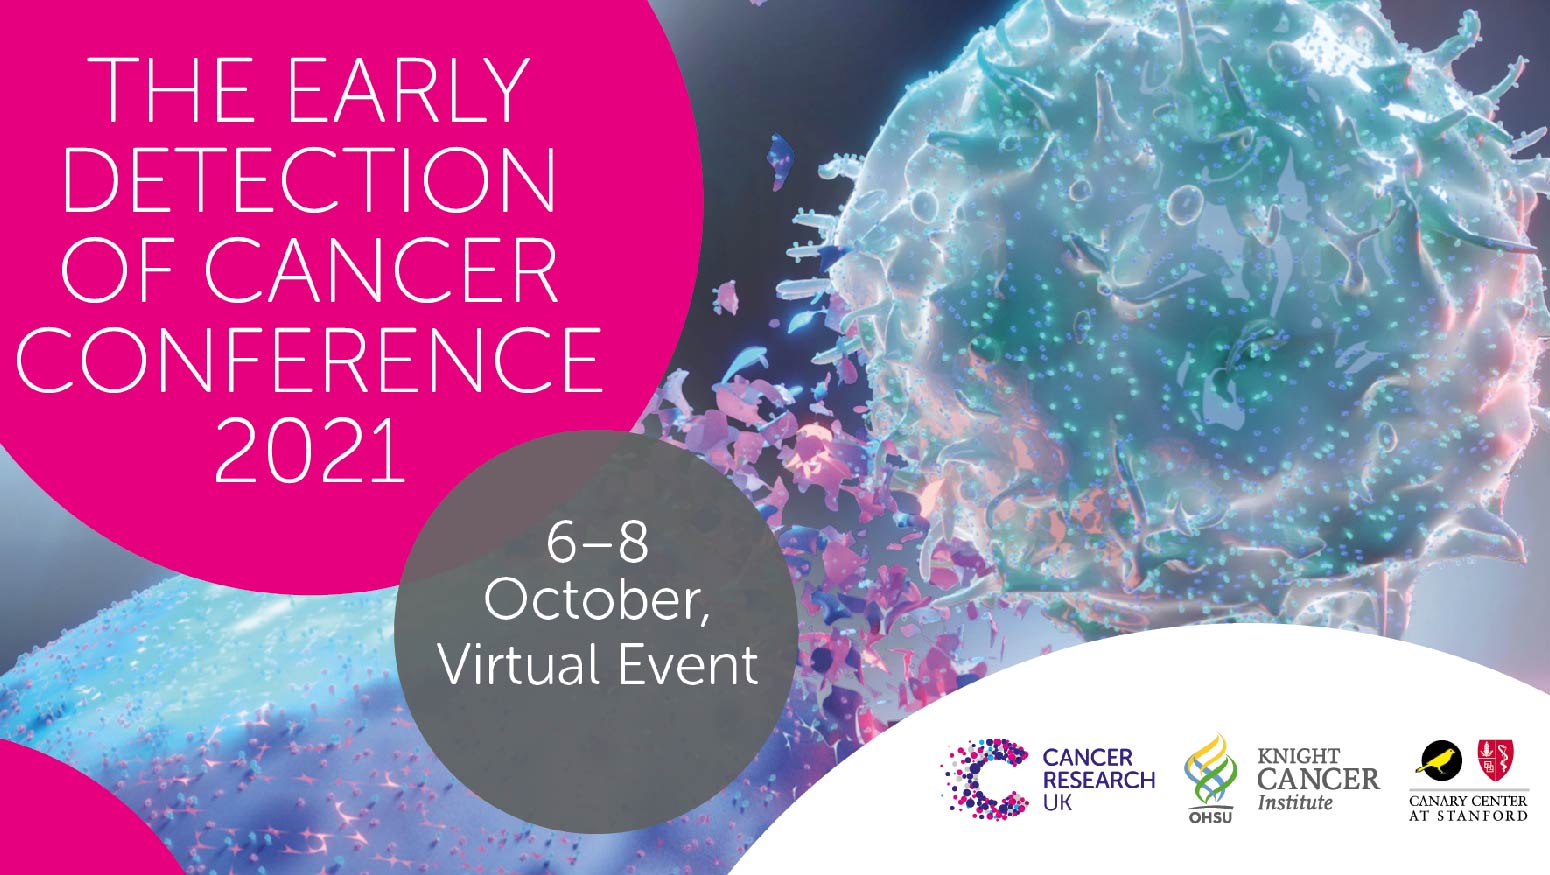 Early Detection of Cancer Conference 2021